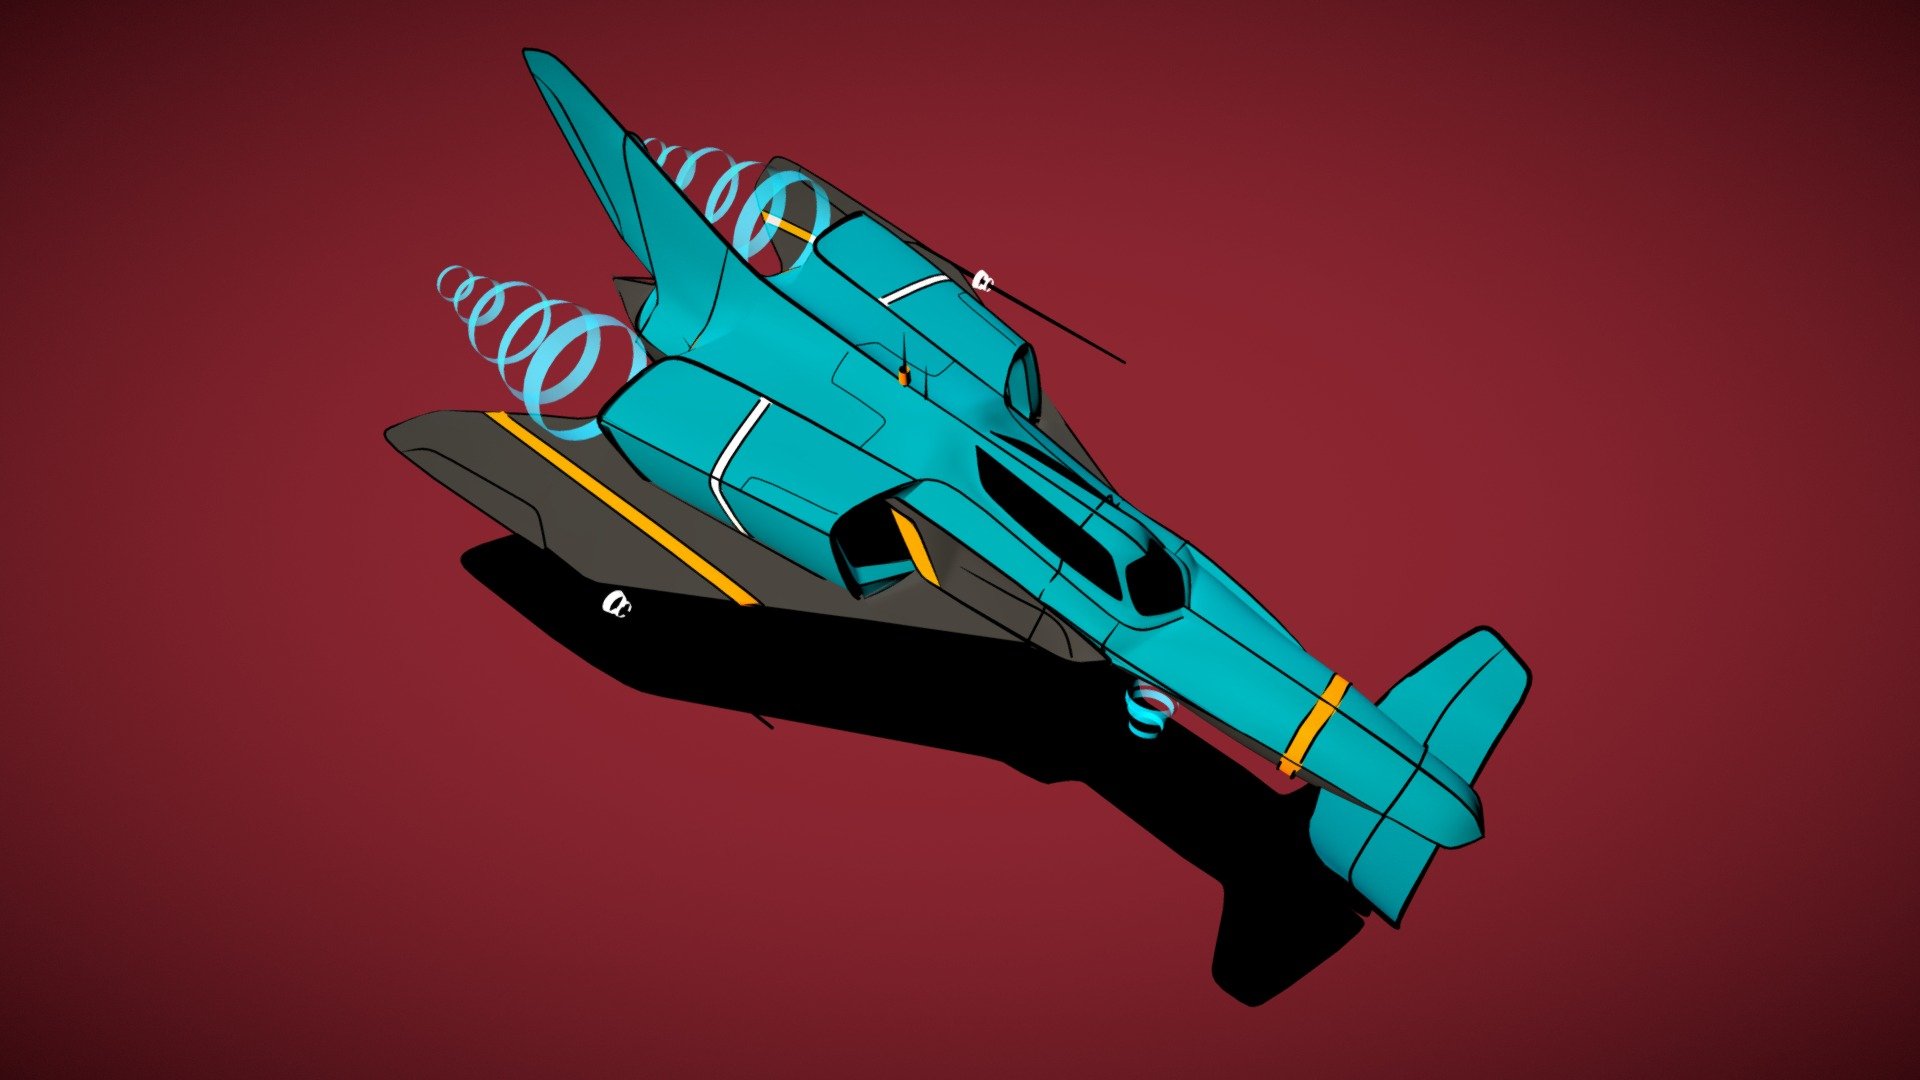 Worked on this for about 1 hour, I think I'm going to make a series of Raceships with different design themes..
I've been trying to speed things up when working in Gravity Sketch, so i'm going to try and do a VR sketch each day this year. A bit ambitious, but i'm up for the challenge. 3d model